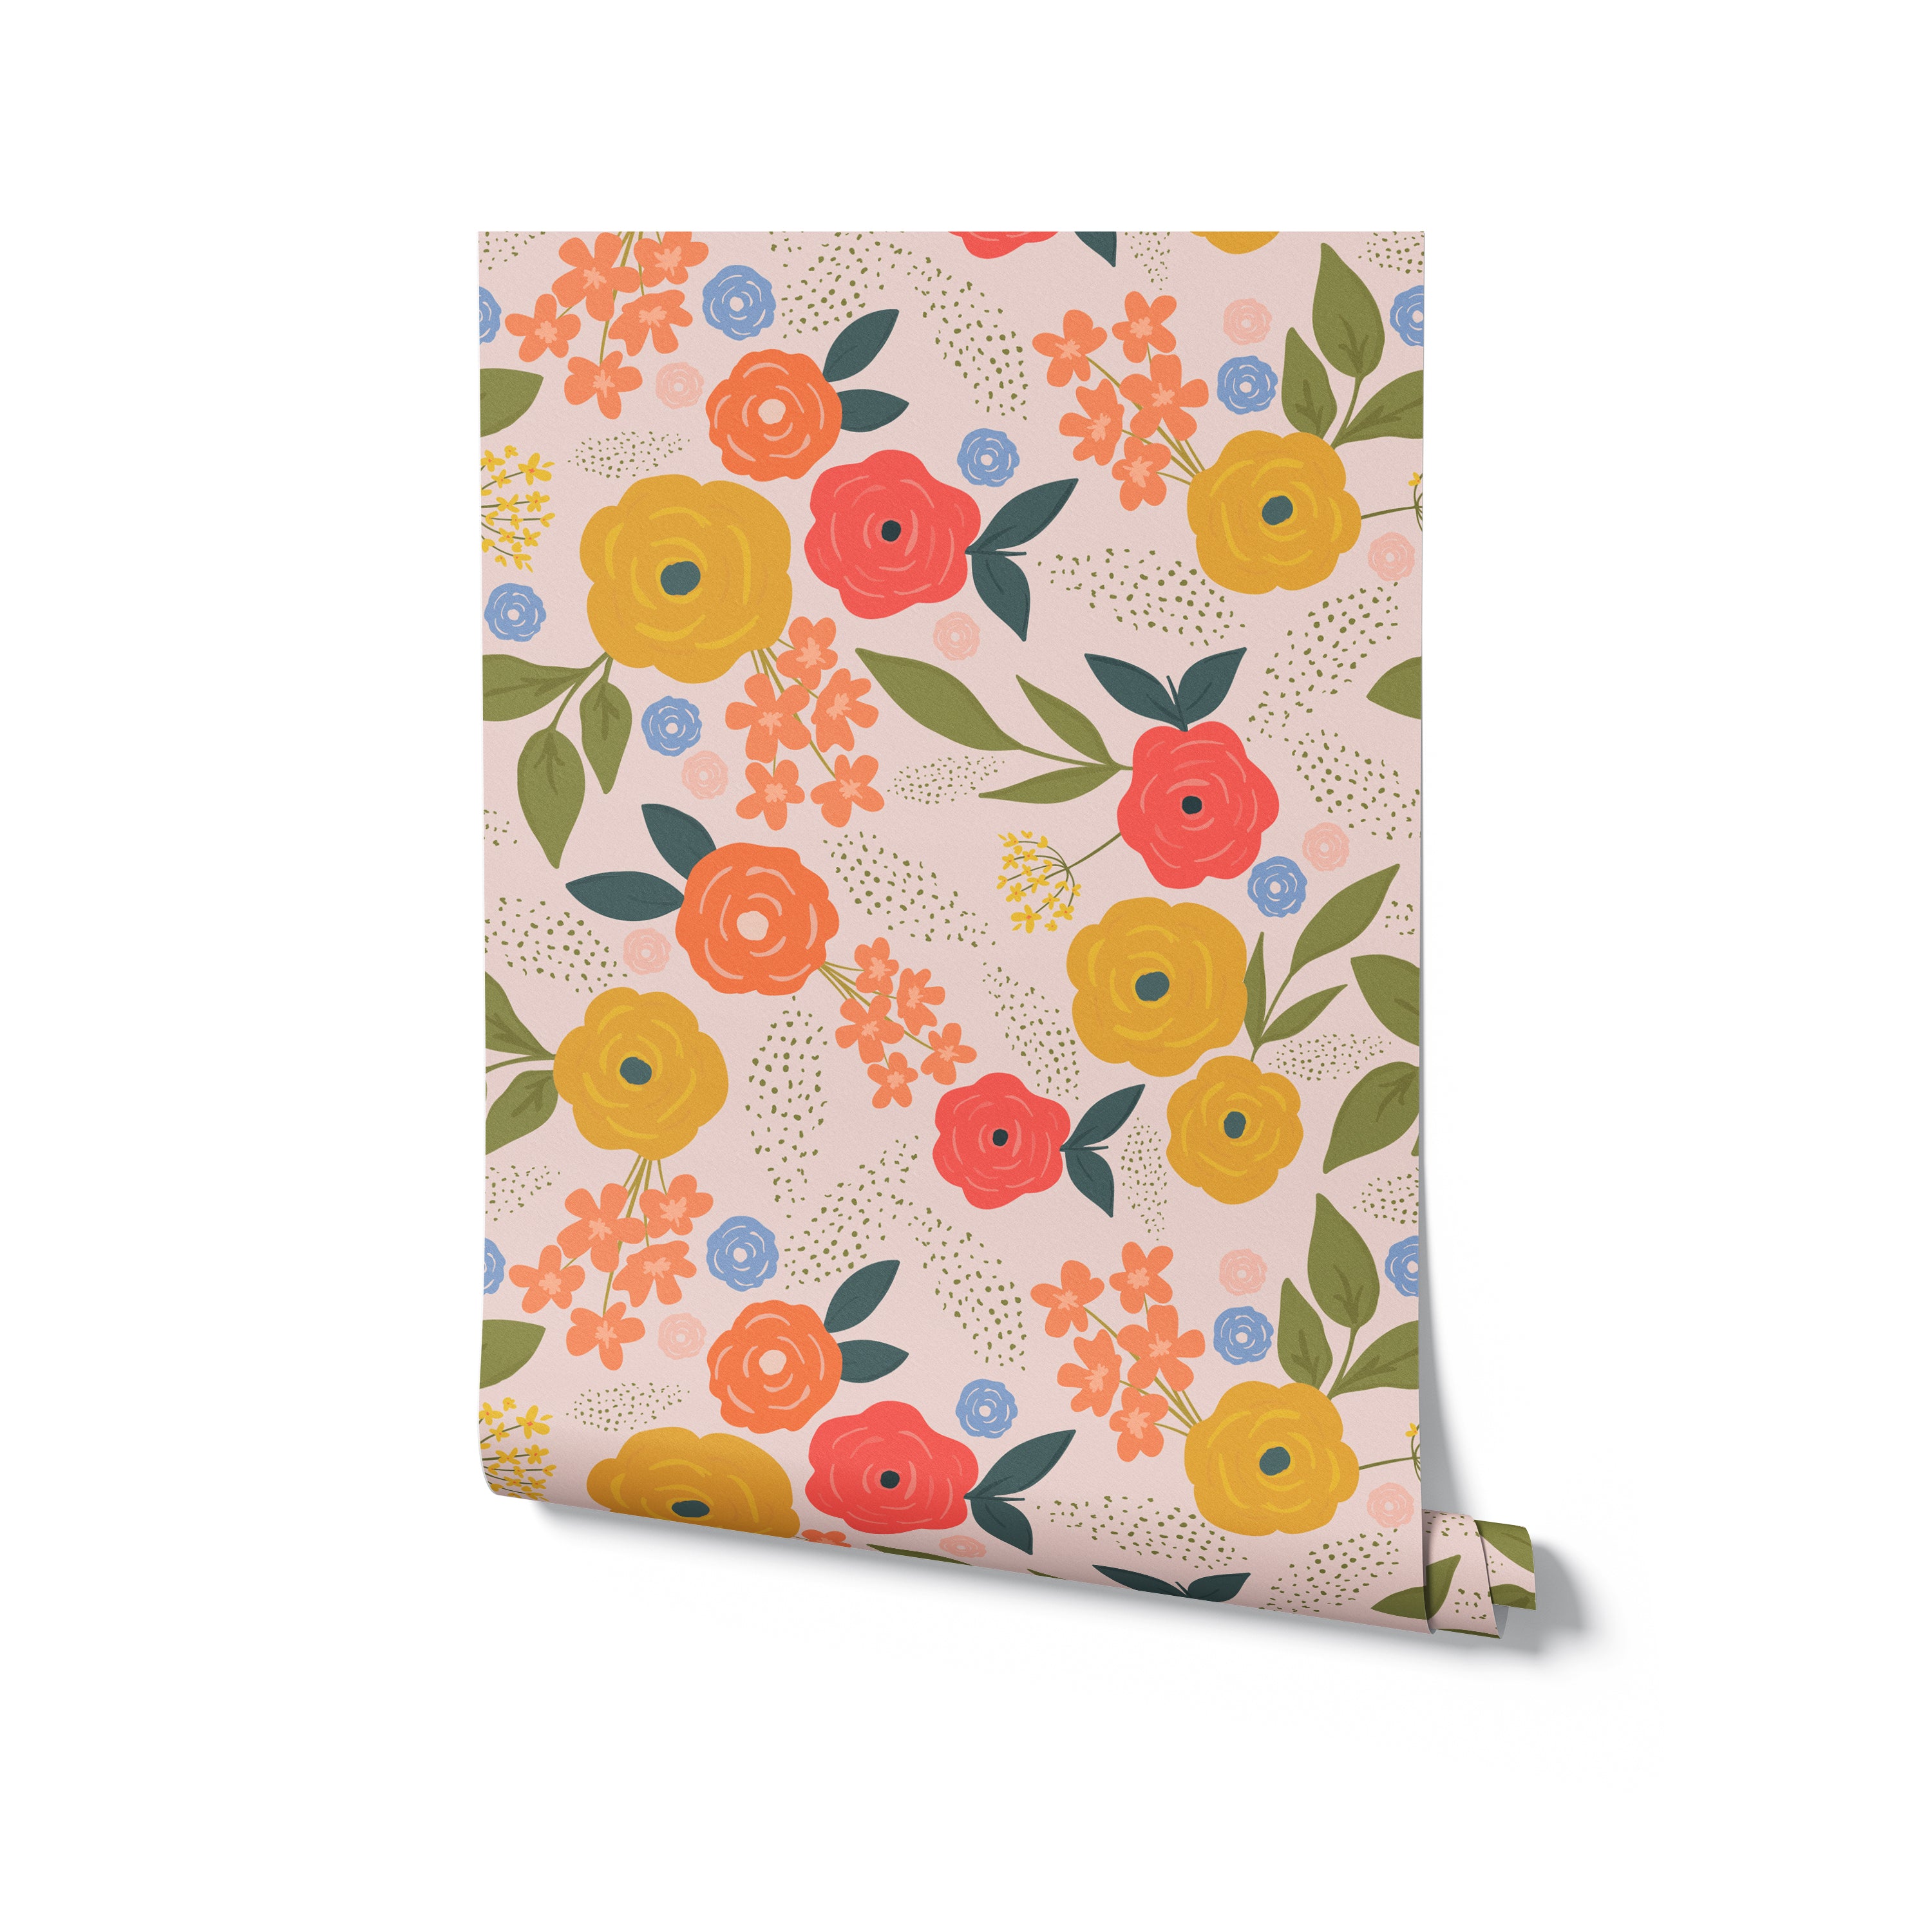 A roll of wallpaper with a floral pattern of yellow, orange, and red roses, small blue flowers, and green leaves on a soft pink background